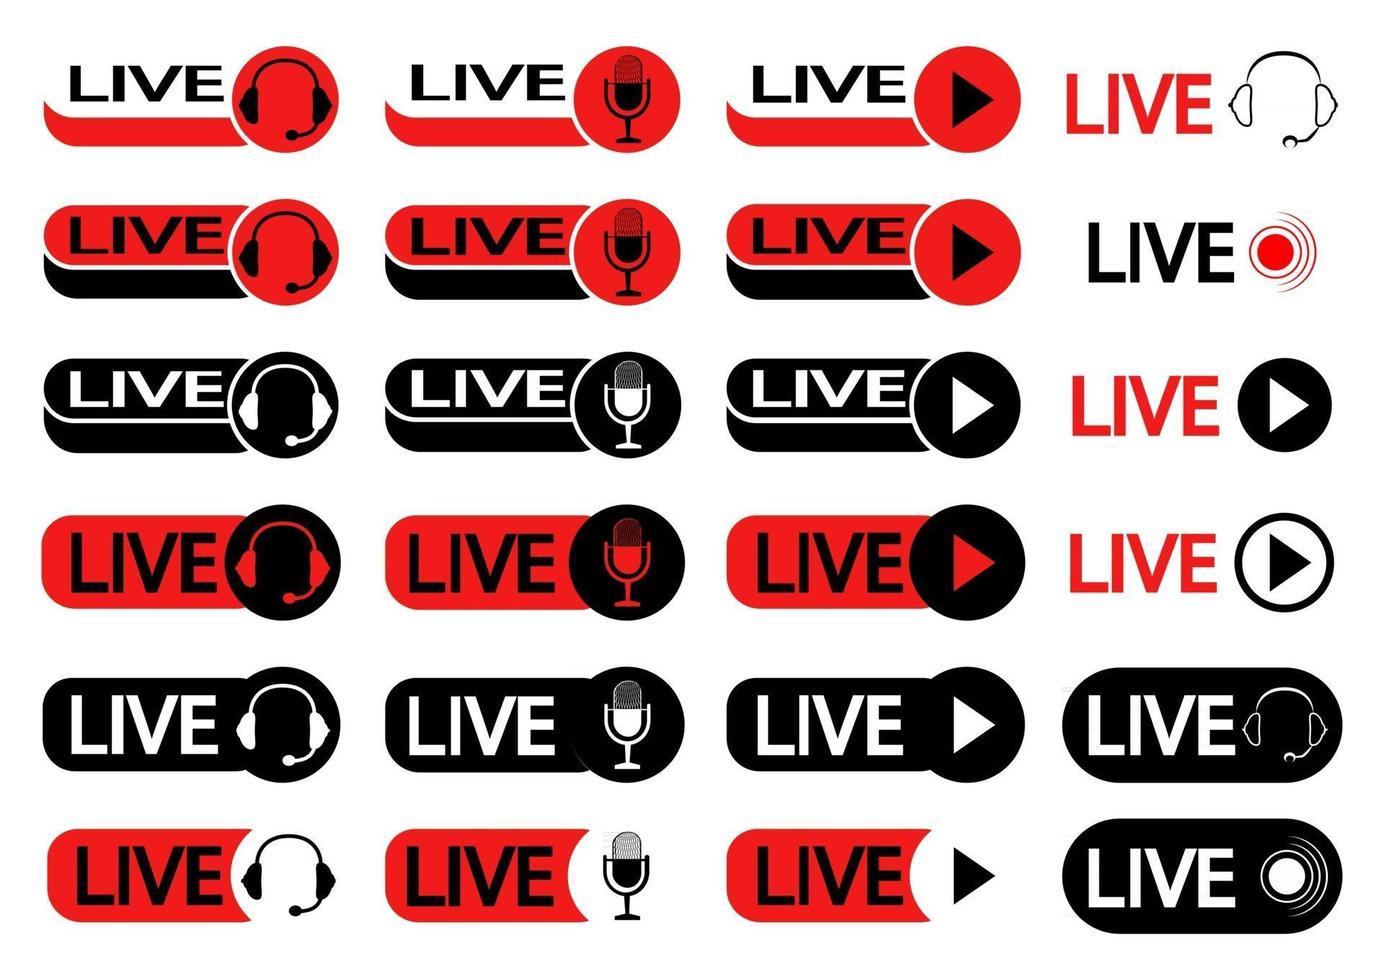 Set of buttons for live streaming. Set of symbols for live streaming, broadcasting, online stream in black and red color. Icons with headphones, microphone and play symbol for online broadcast vector